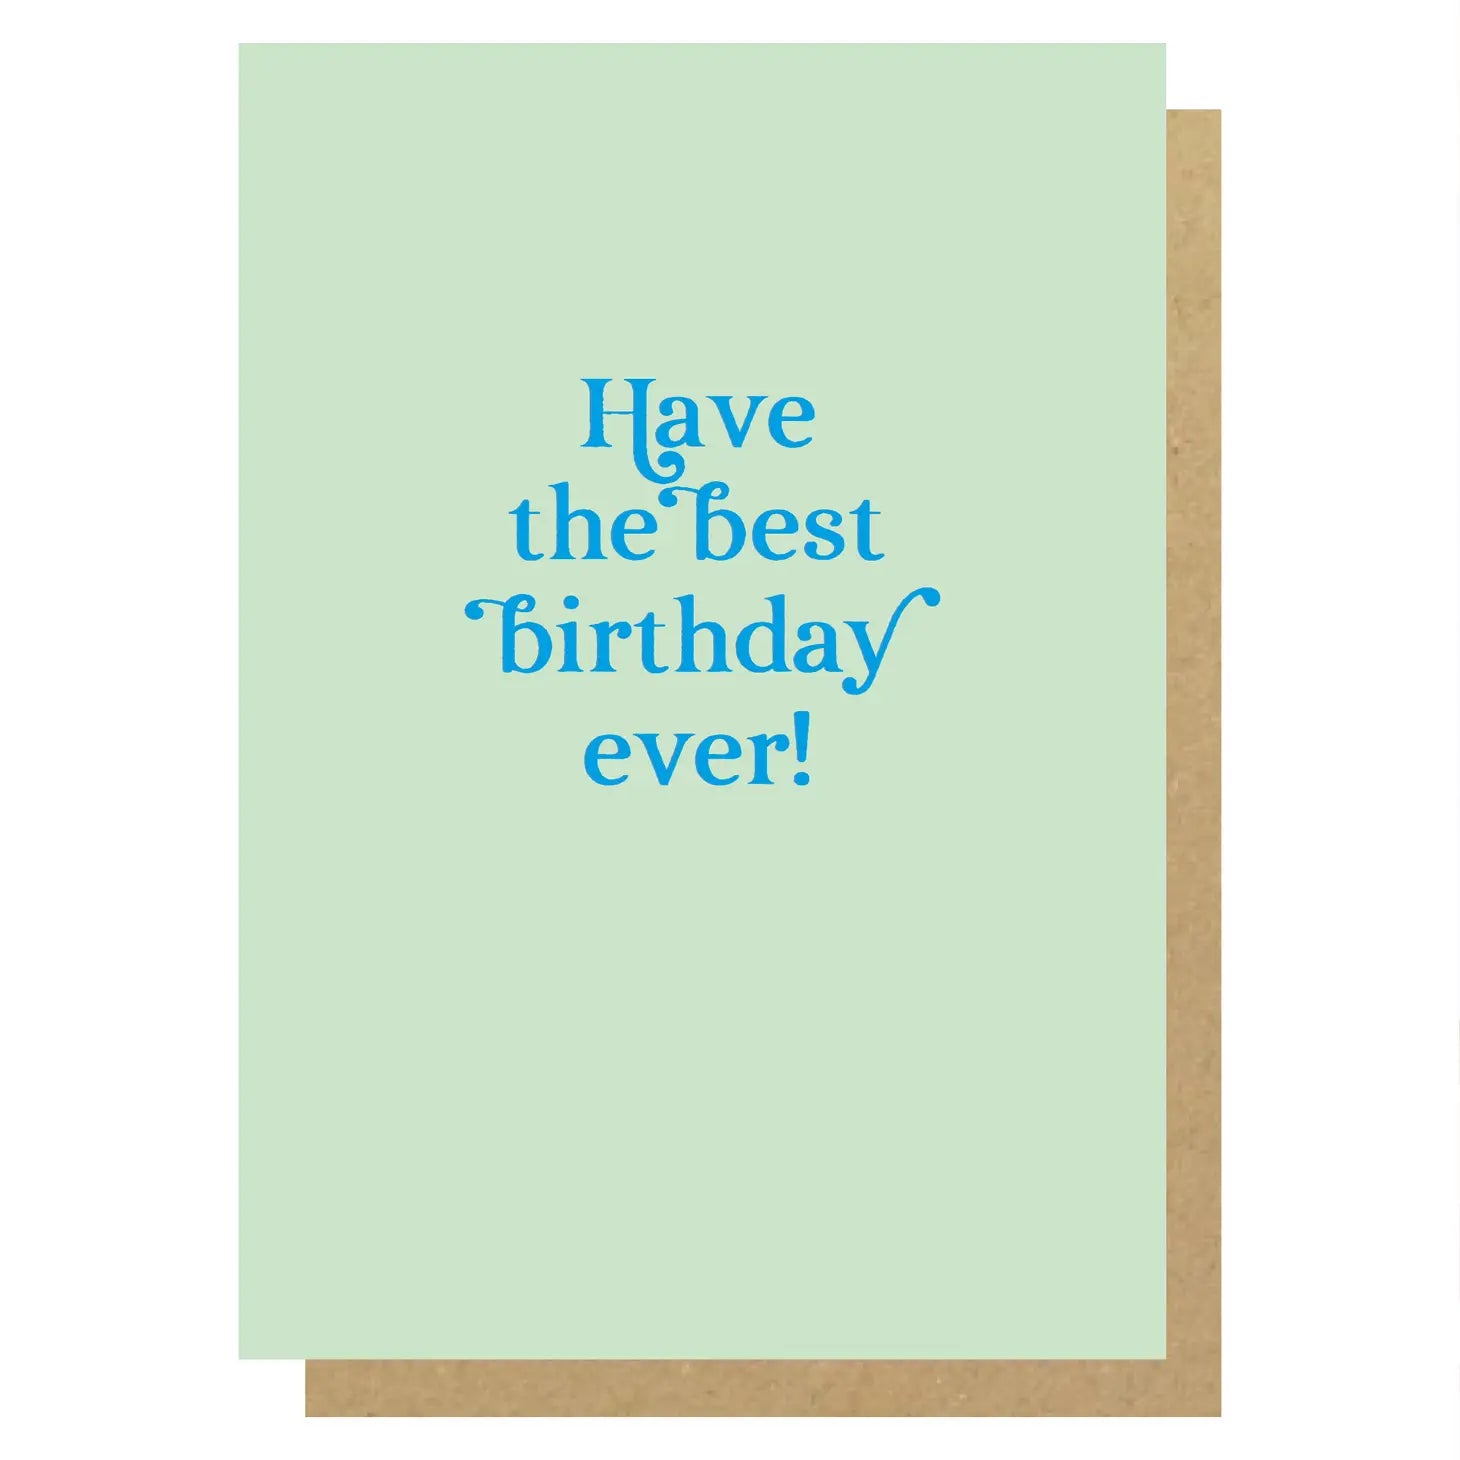 HAVE THE BEST BIRTHDAY EVER! | CARD BY LUCKY INK